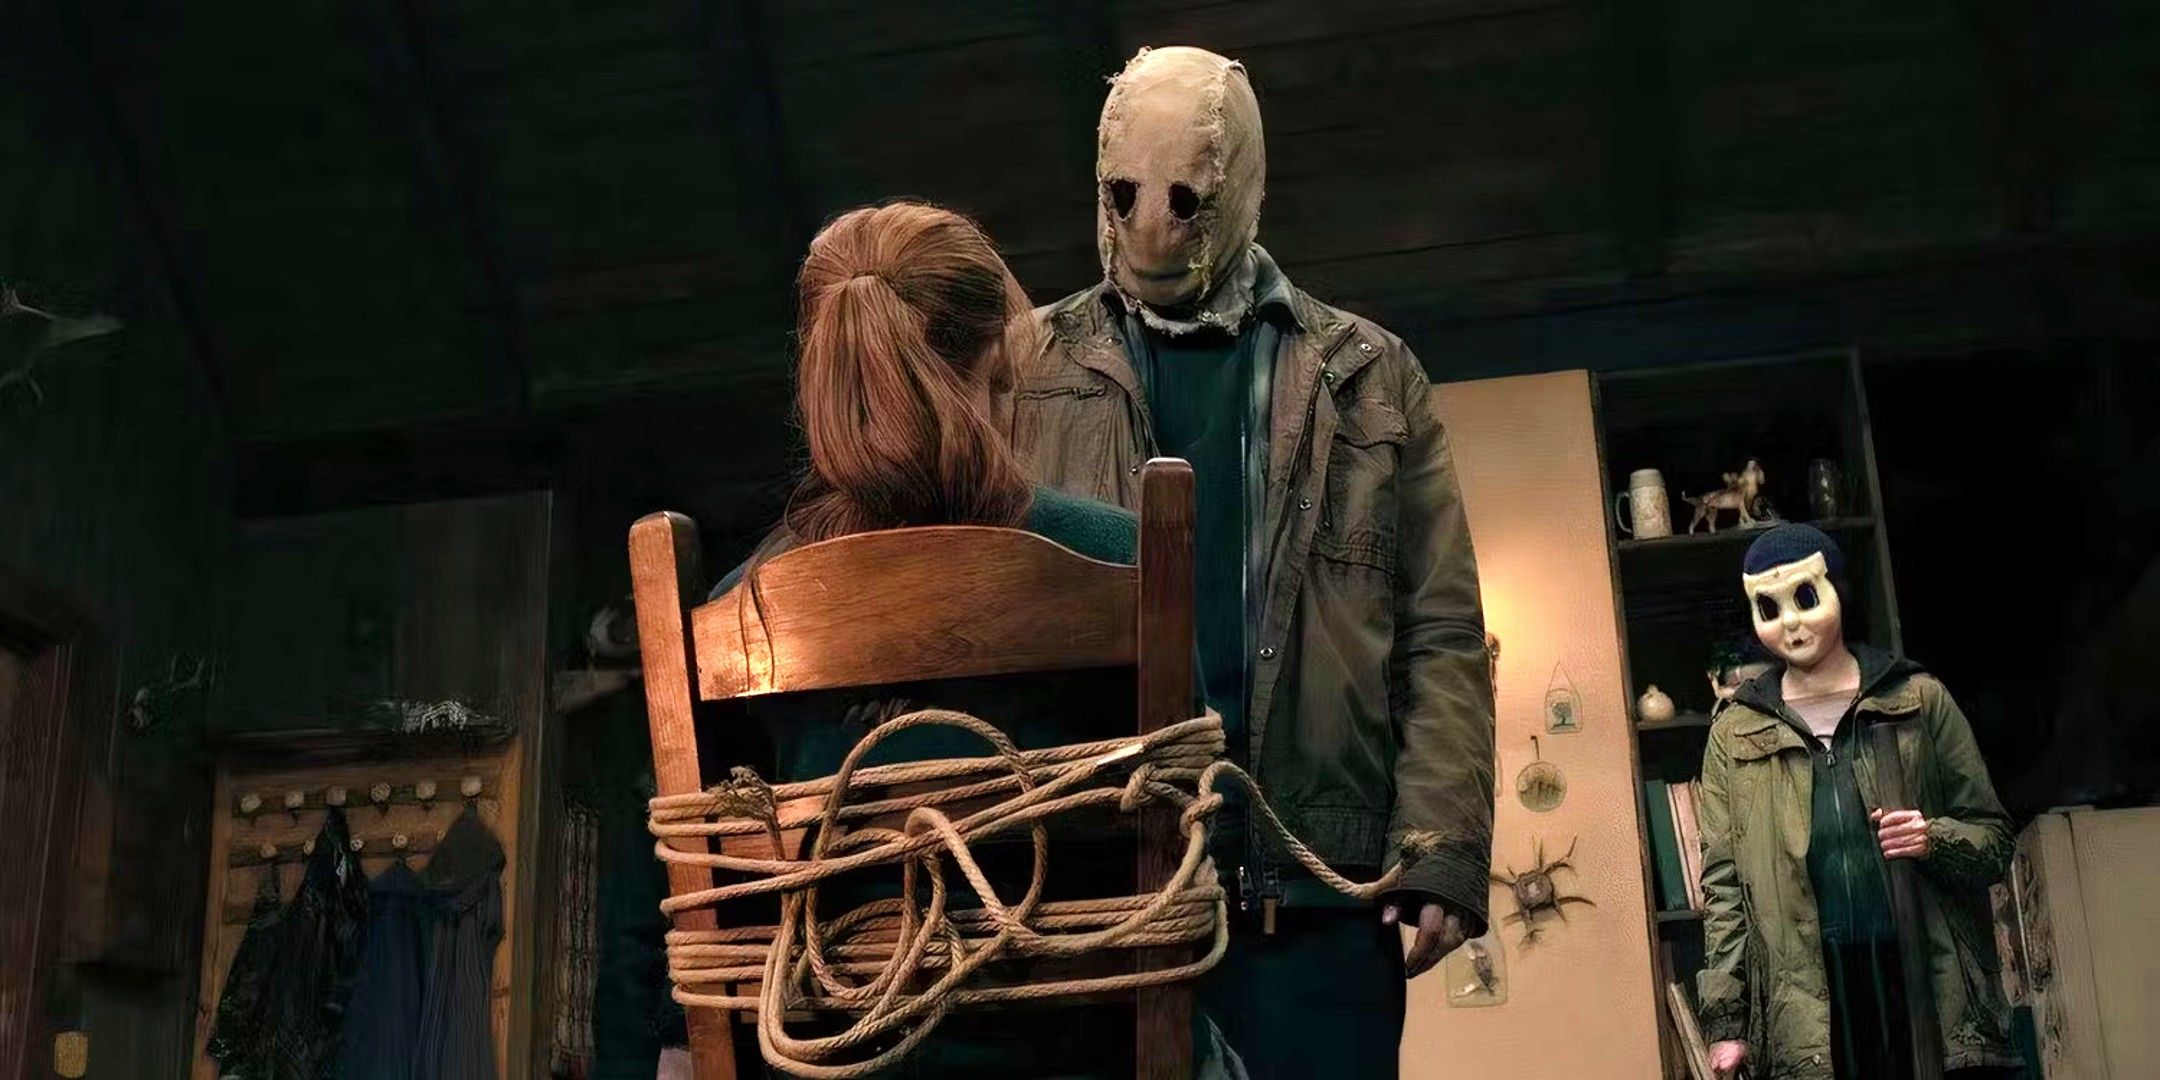 Madelaine Petsch as Maya tied up and helpless while facing a masked killer in The Strangers Chapter 1